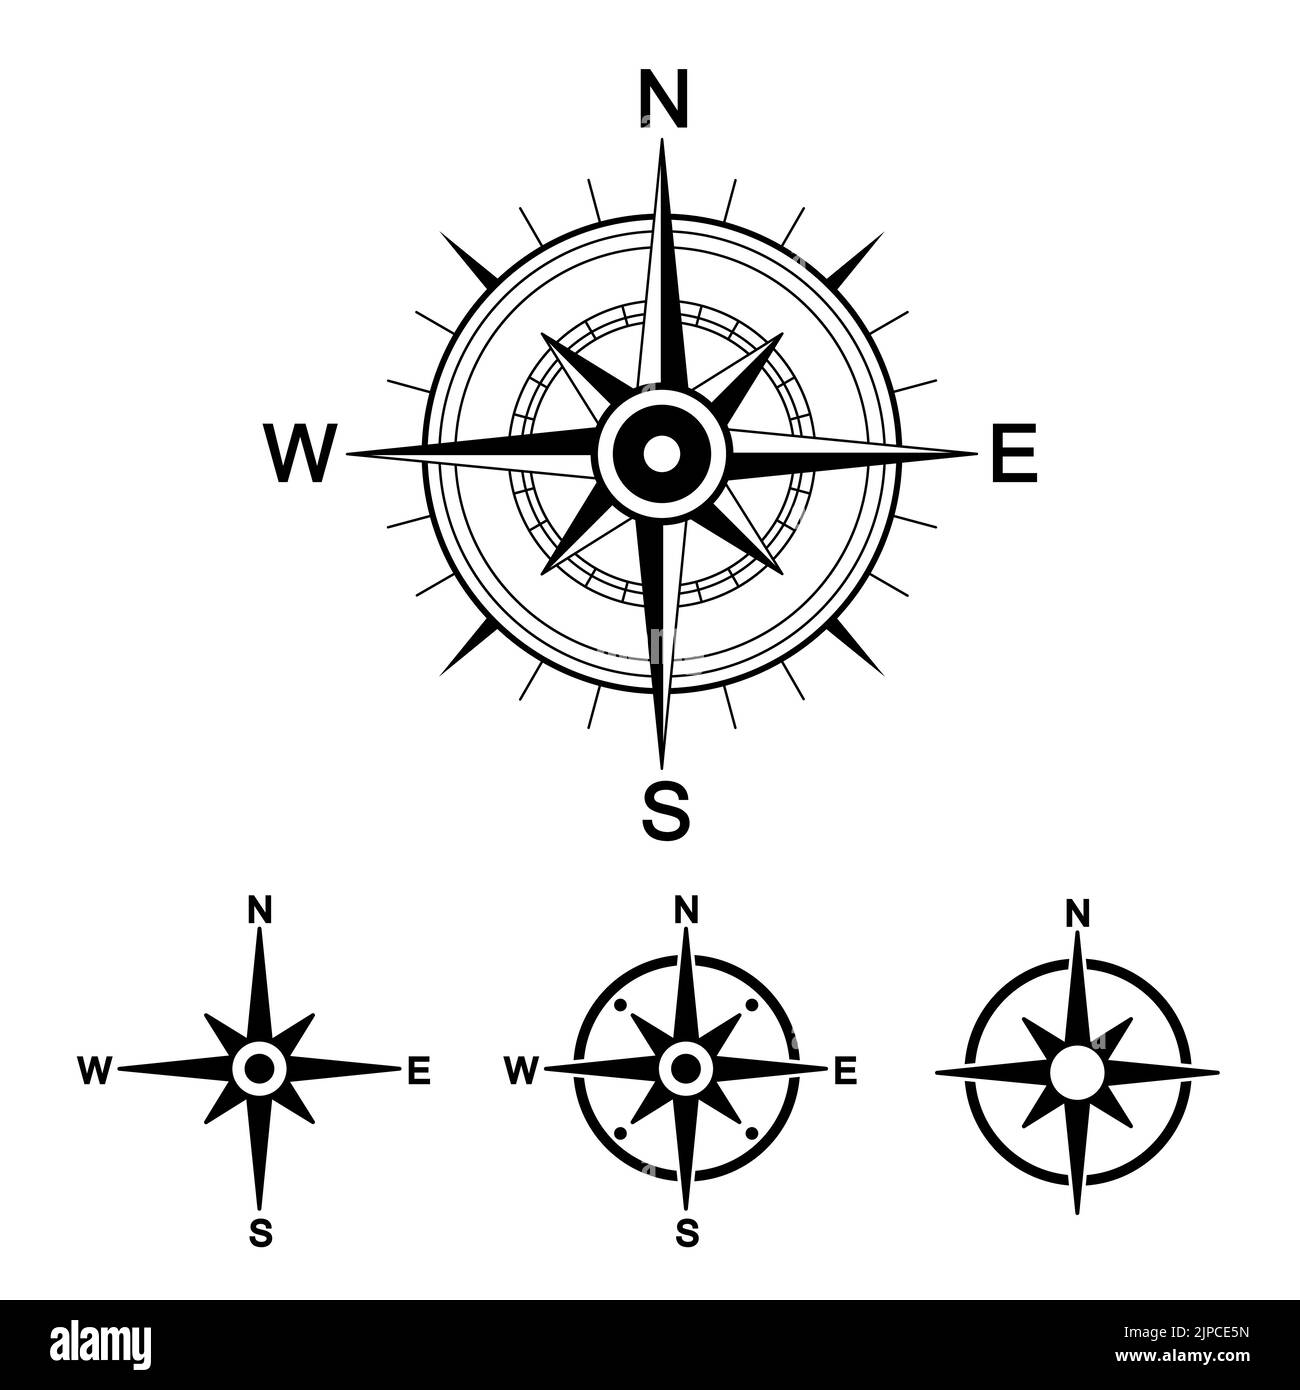 8 directions of chess compass logo. Stock Vector